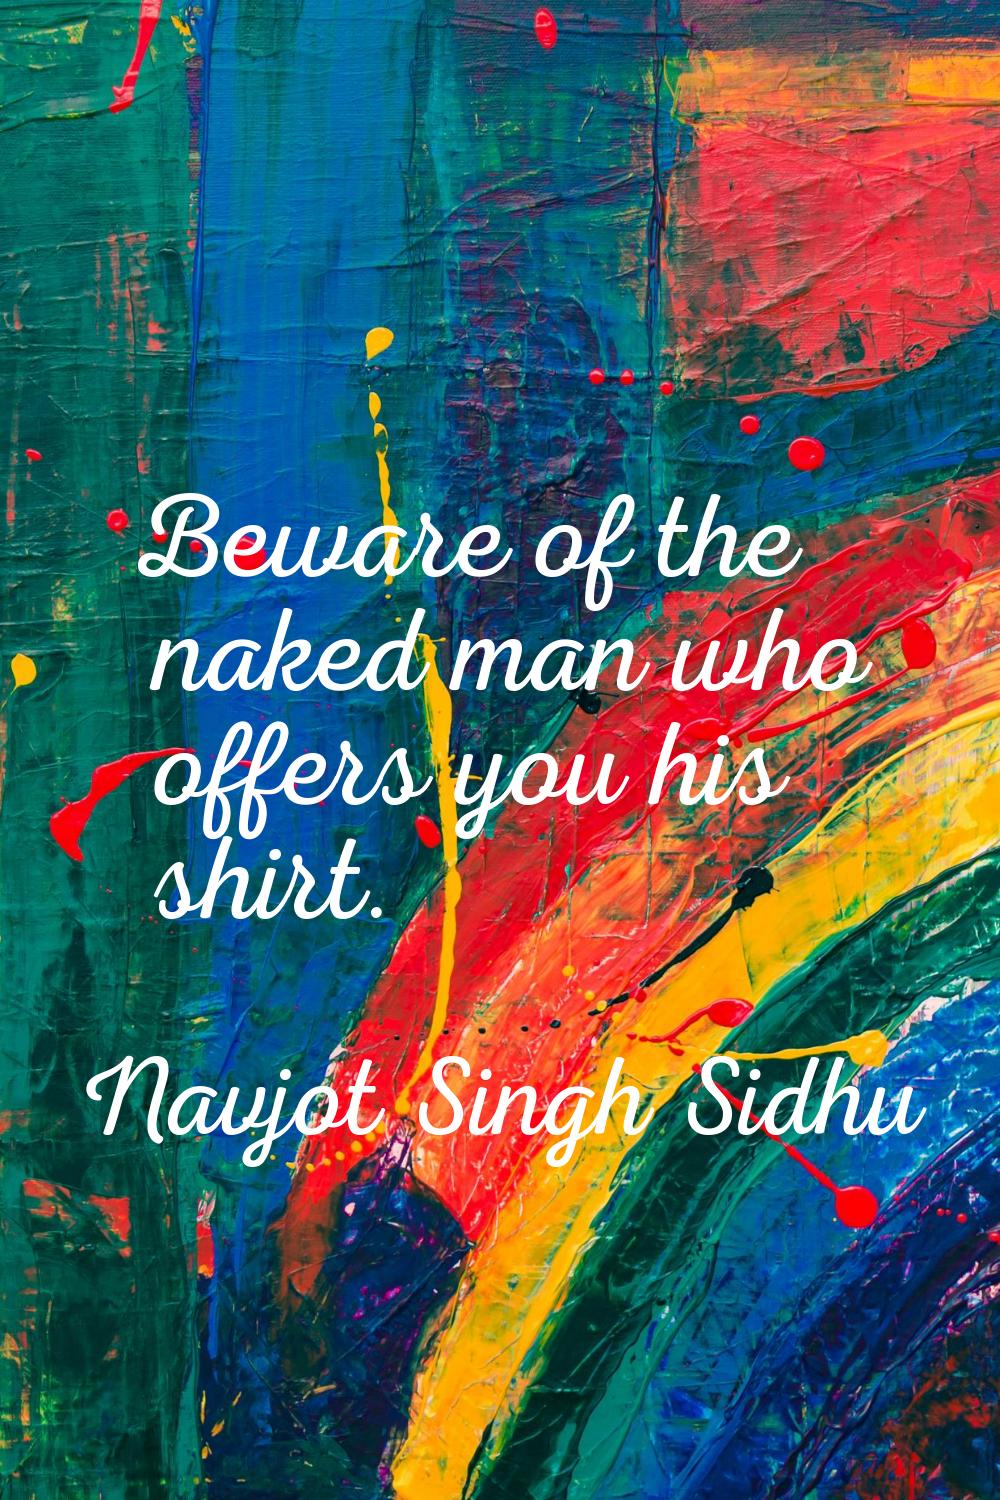 Beware of the naked man who offers you his shirt.